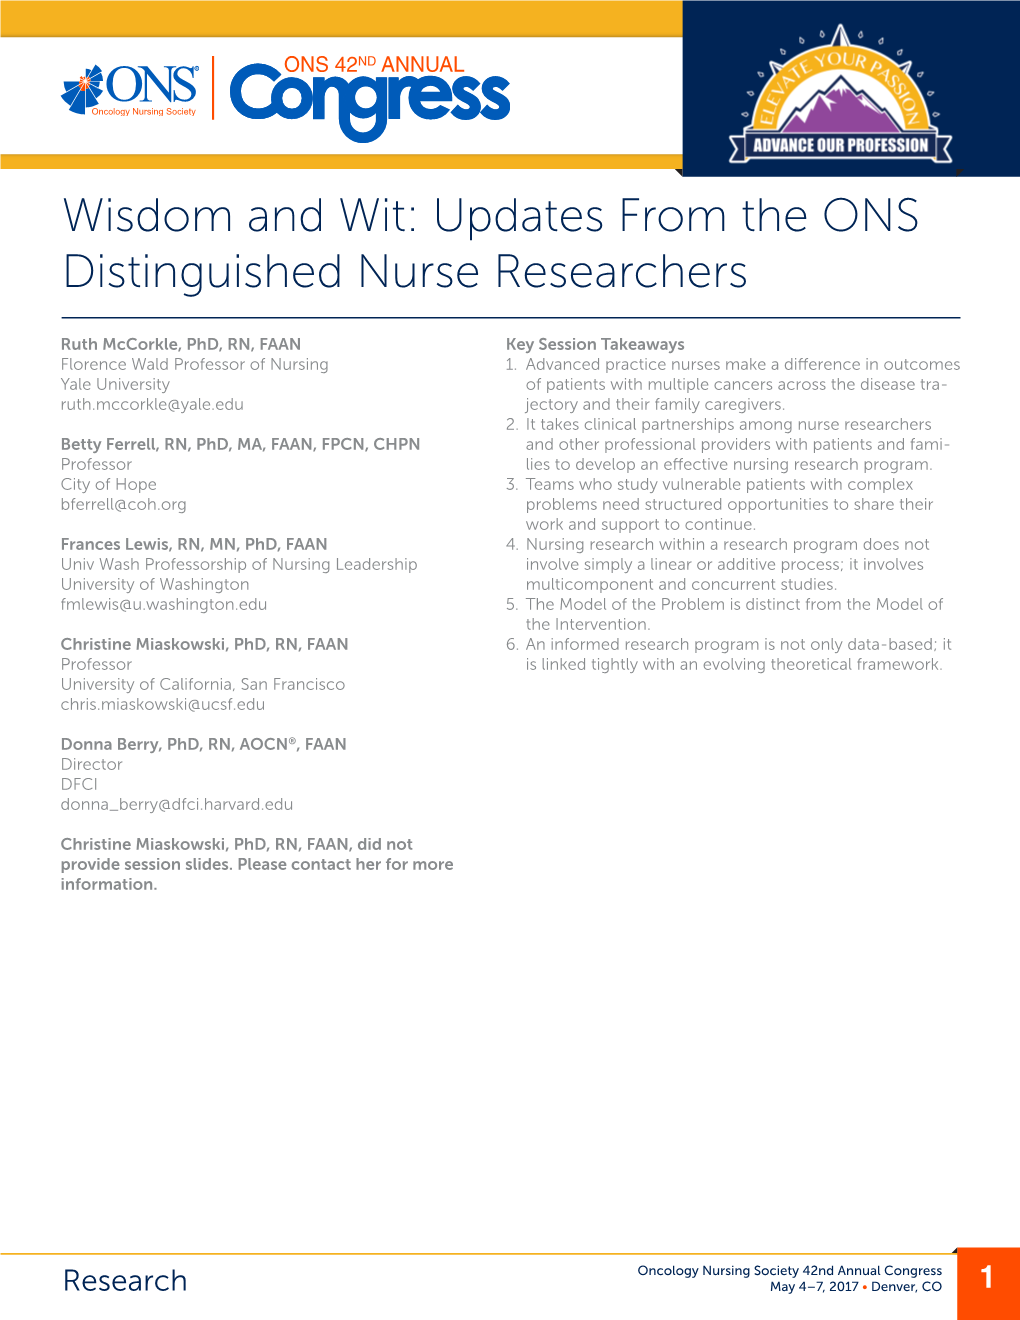 Wisdom and Wit: Updates from the ONS Distinguished Nurse Researchers